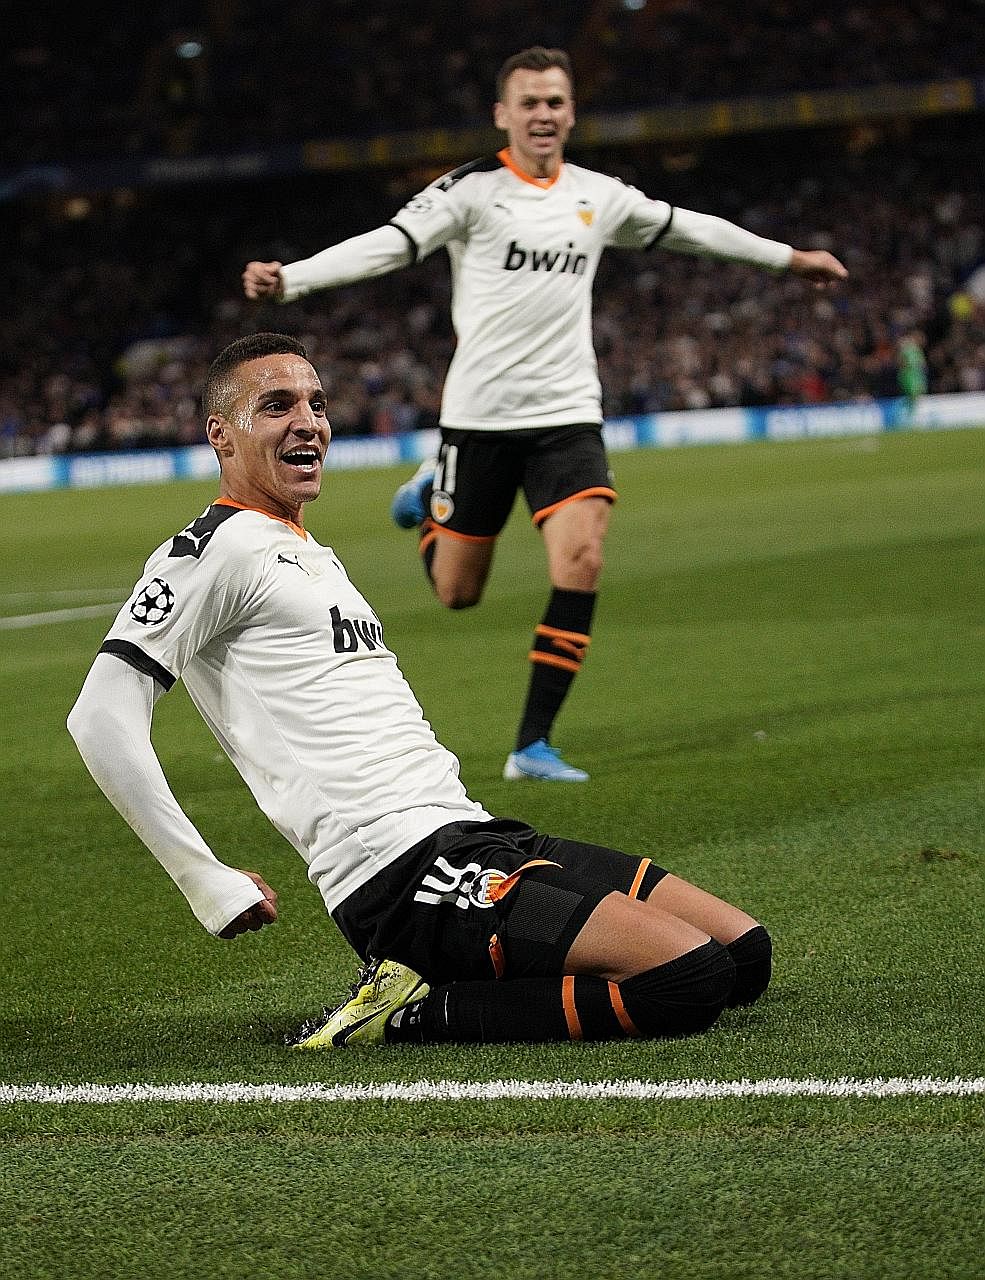 Valencia's Rodrigo celebrating after scoring the winning goal in the 1-0 Champions League win over Chelsea at Stamford Bridge on Tuesday night.